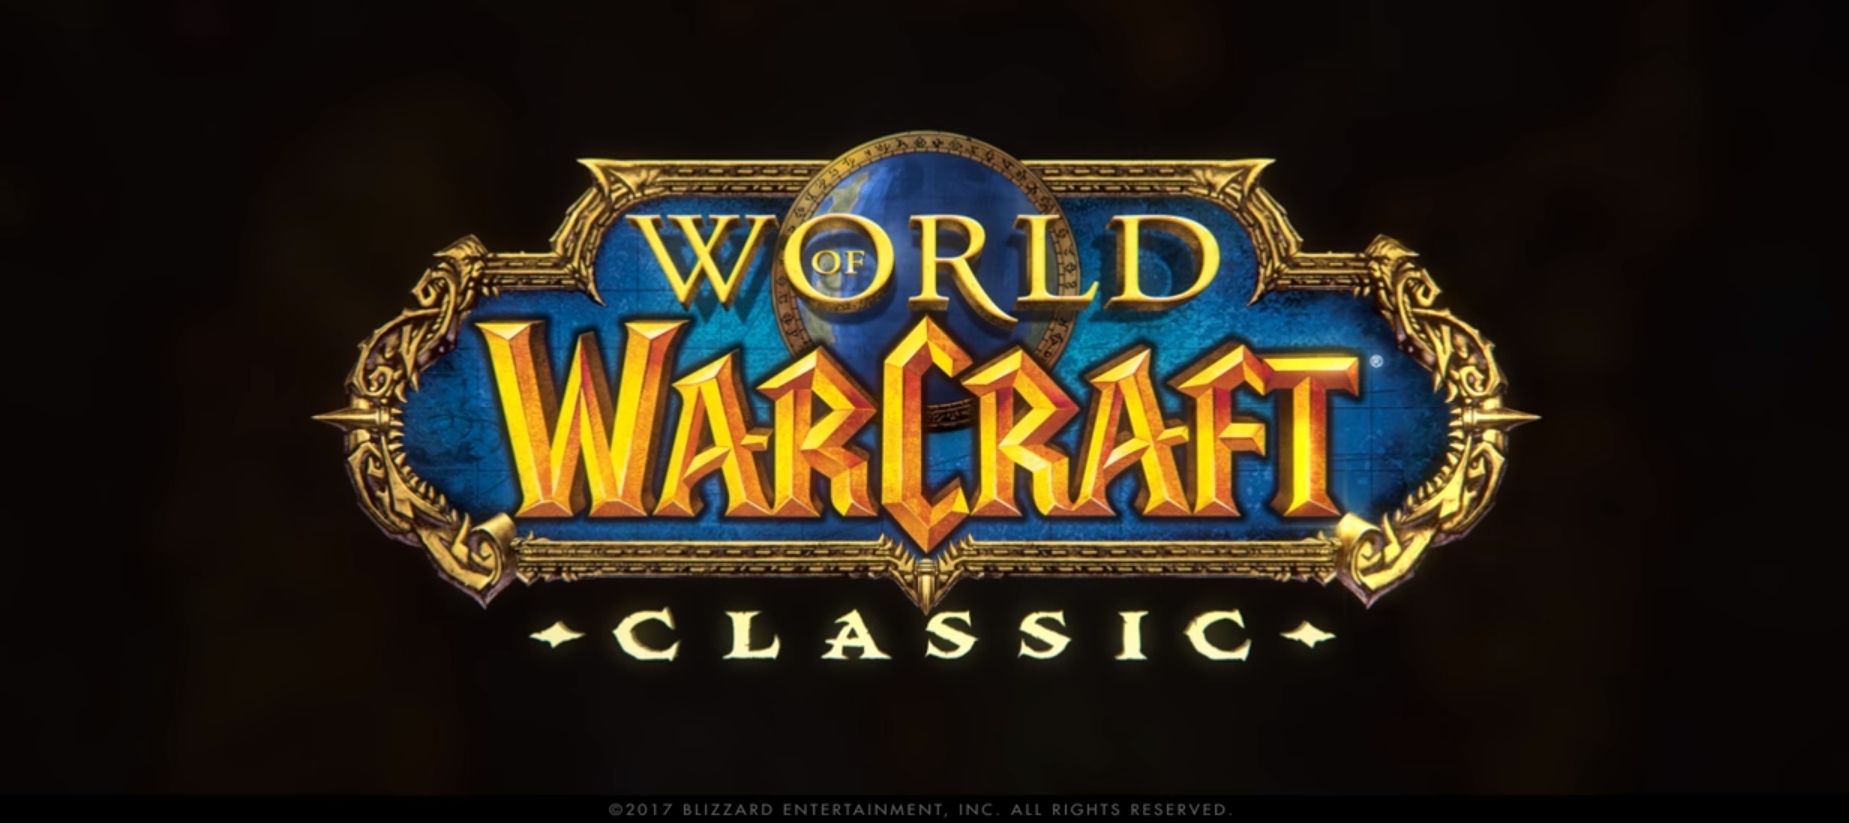 The World Of Warcraft: Classic Community Seems Torn Over Possibilities Of Upcoming Burning Crusade Content